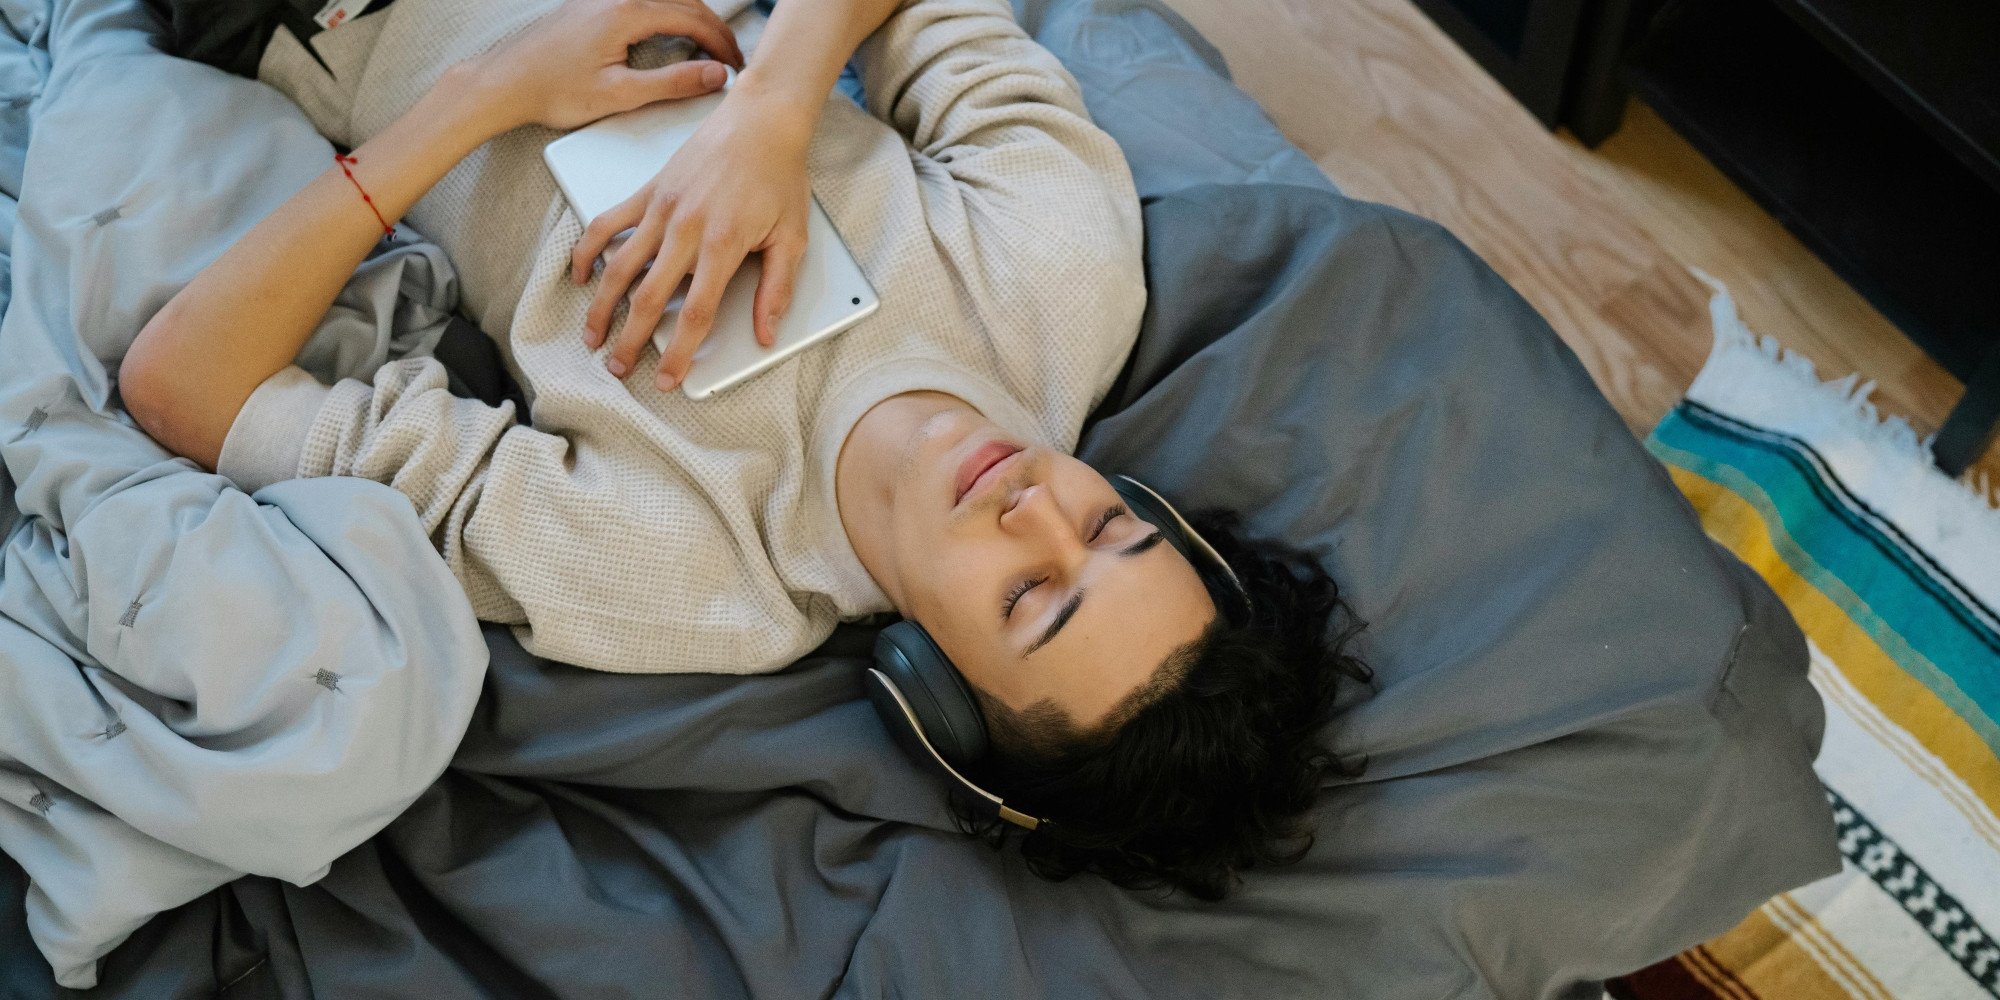 The Best Songs to Help You Fall Asleep Faster